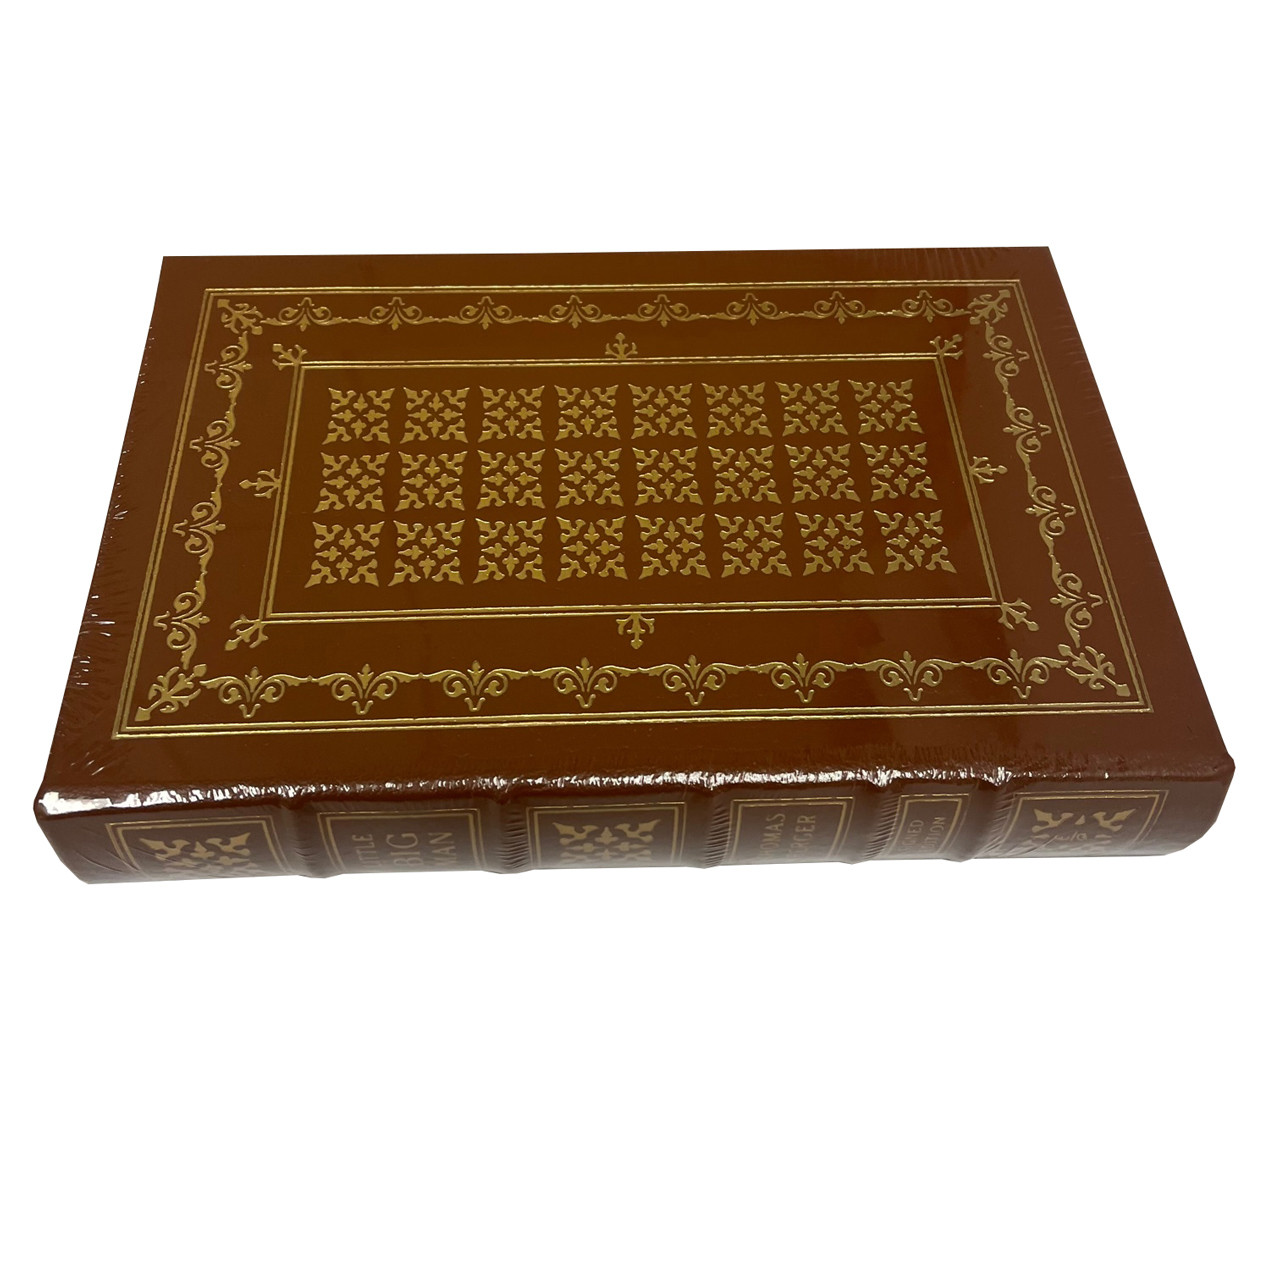 Easton Press "Little Big Man" Thomas Berger, Signed Limited Edition, Leather Bound Collector's Edition [Sealed]